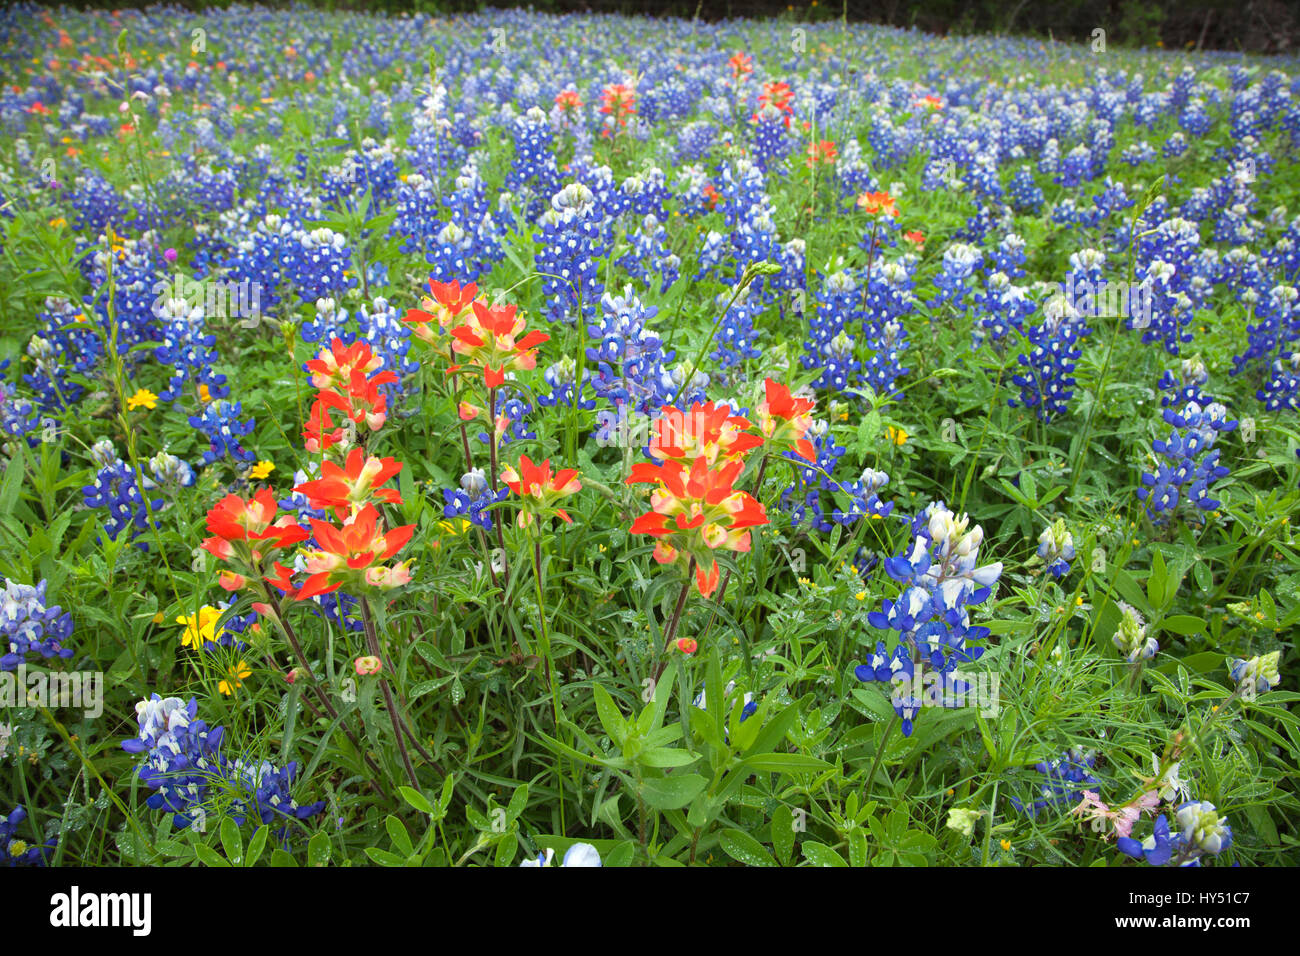 A low angle view of Indian Paintbrush and Bluebonnets wildflowers in a Texas field Stock Photo